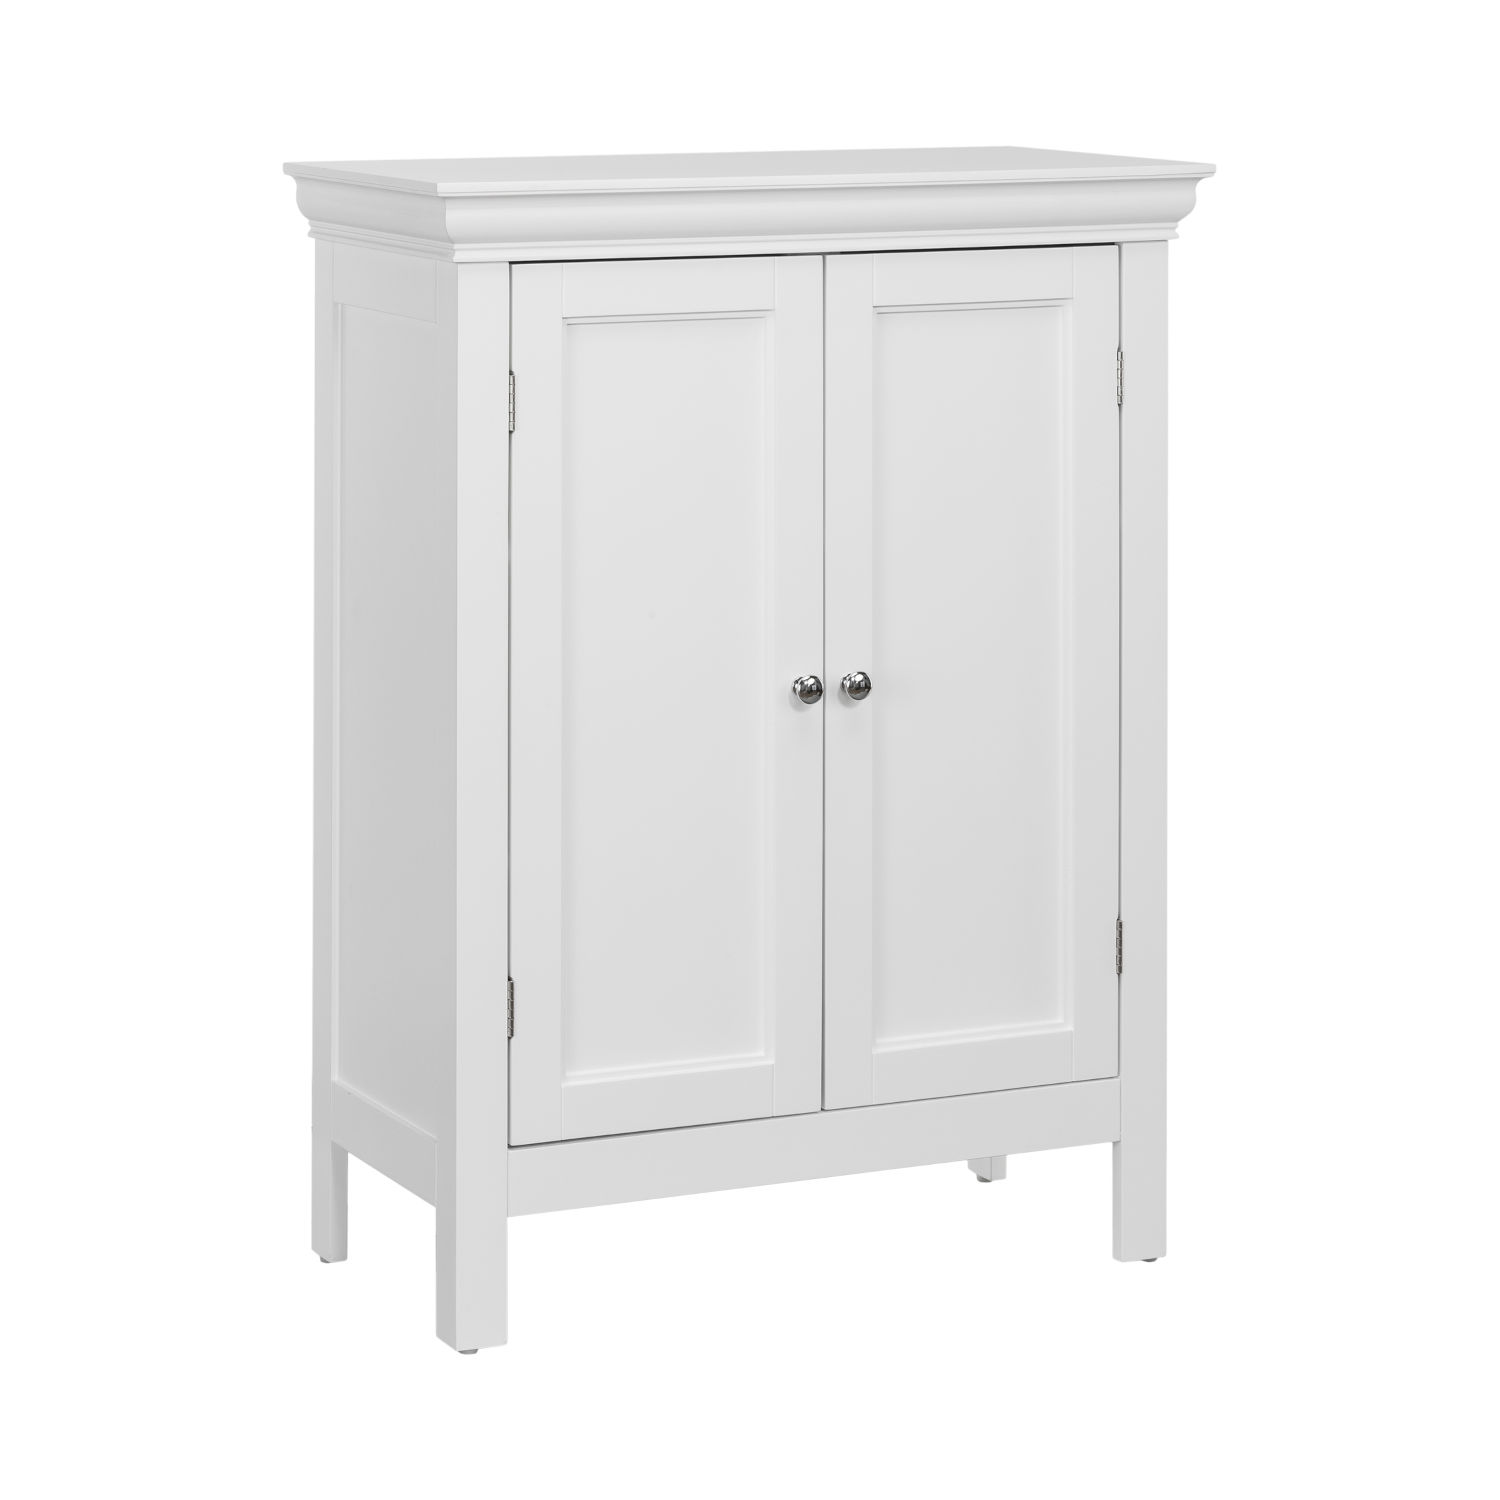 Linen Towers & Cabinets Category